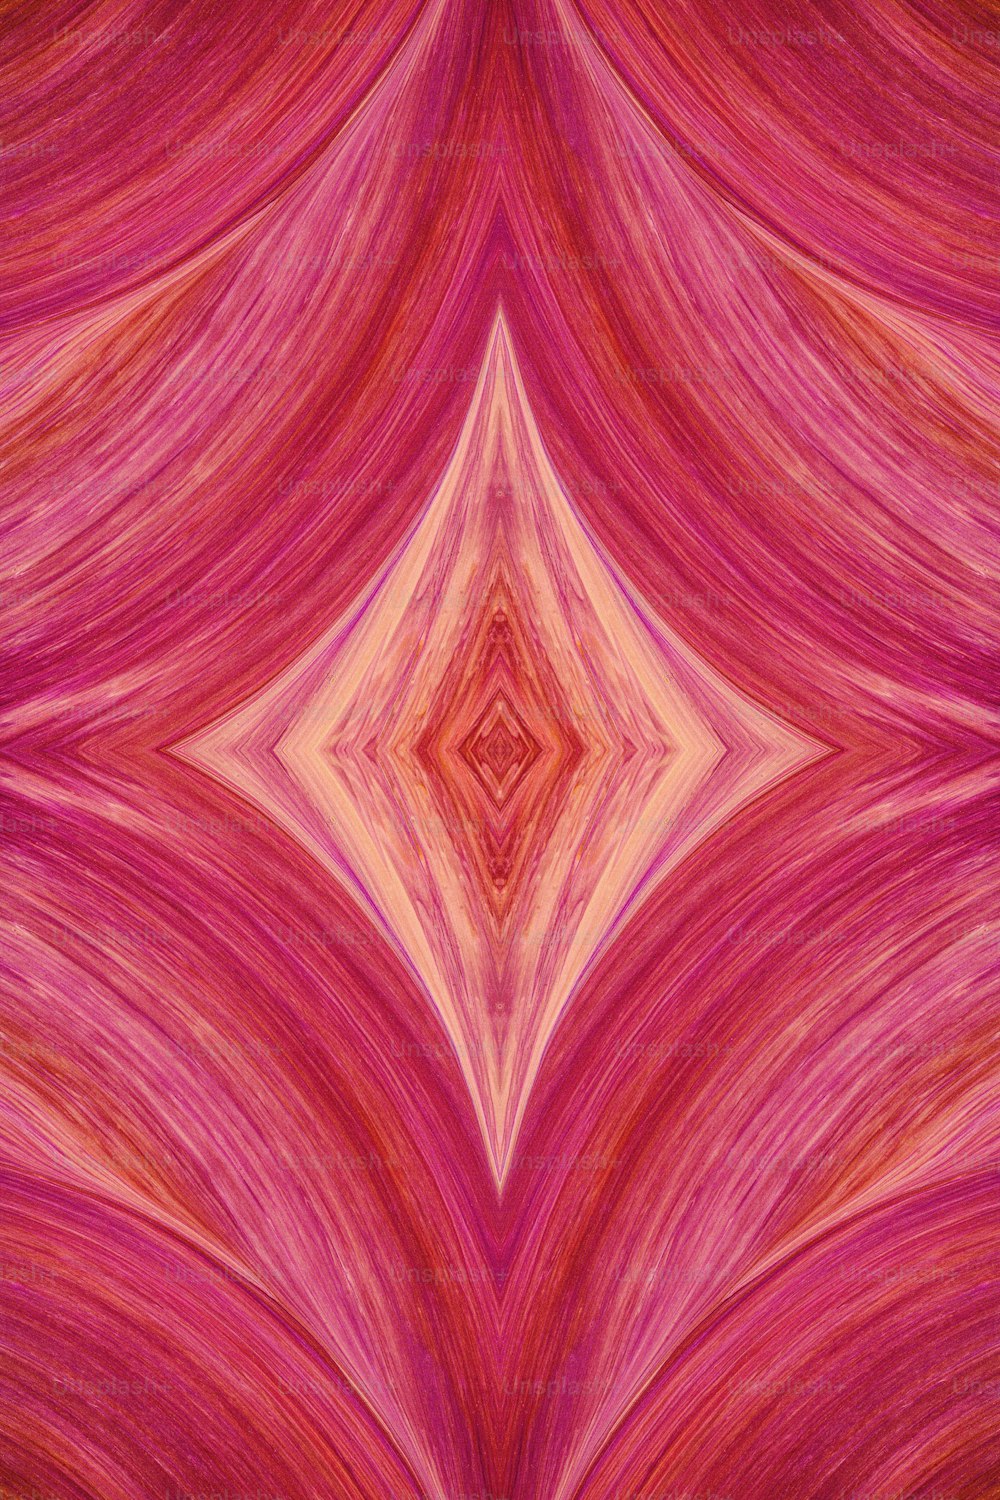 a pink and red abstract background with a star pattern